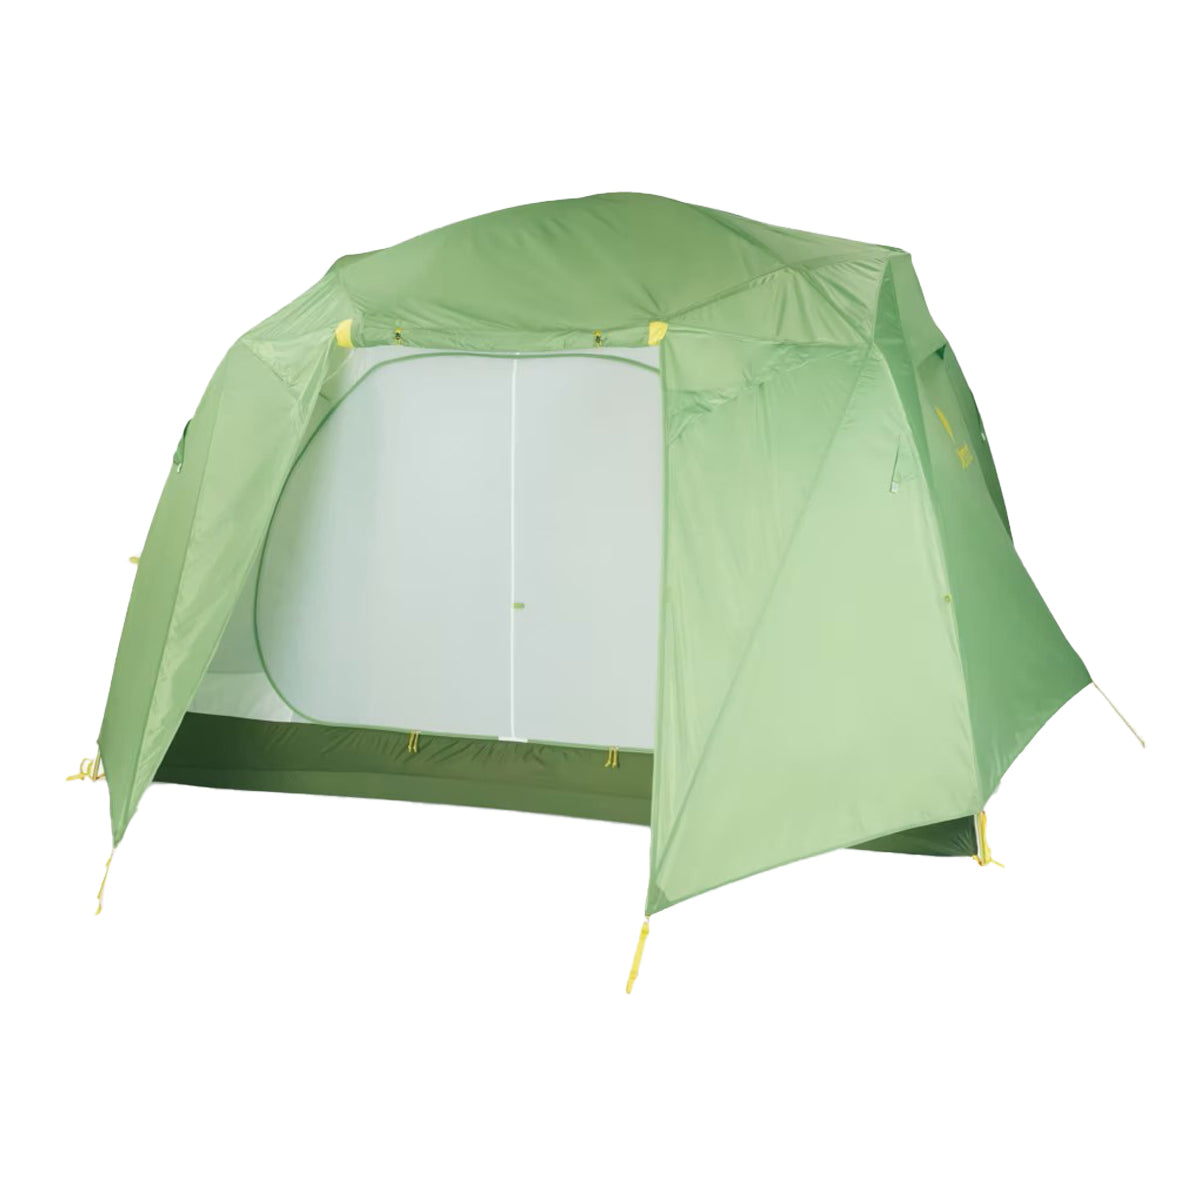 Marmot Limestone 6 Person Tent in  by GOHUNT | Marmot - GOHUNT Shop